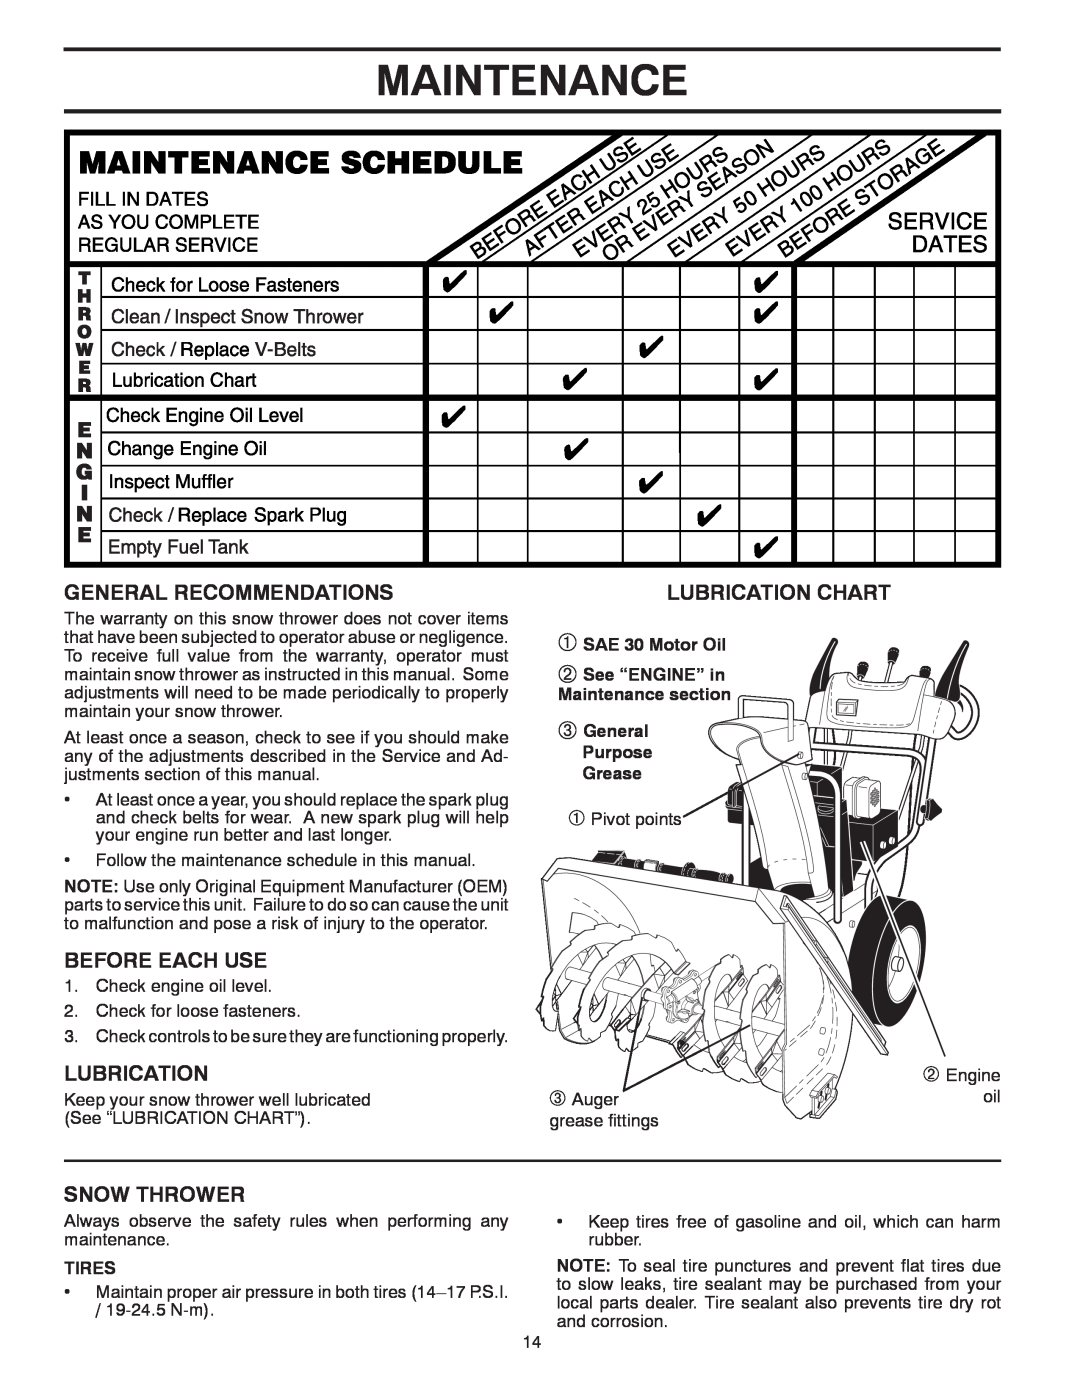 Husqvarna 1130SB Maintenance, General Recommendations, Before Each Use, Snow Thrower, Lubrication Chart, Tires 